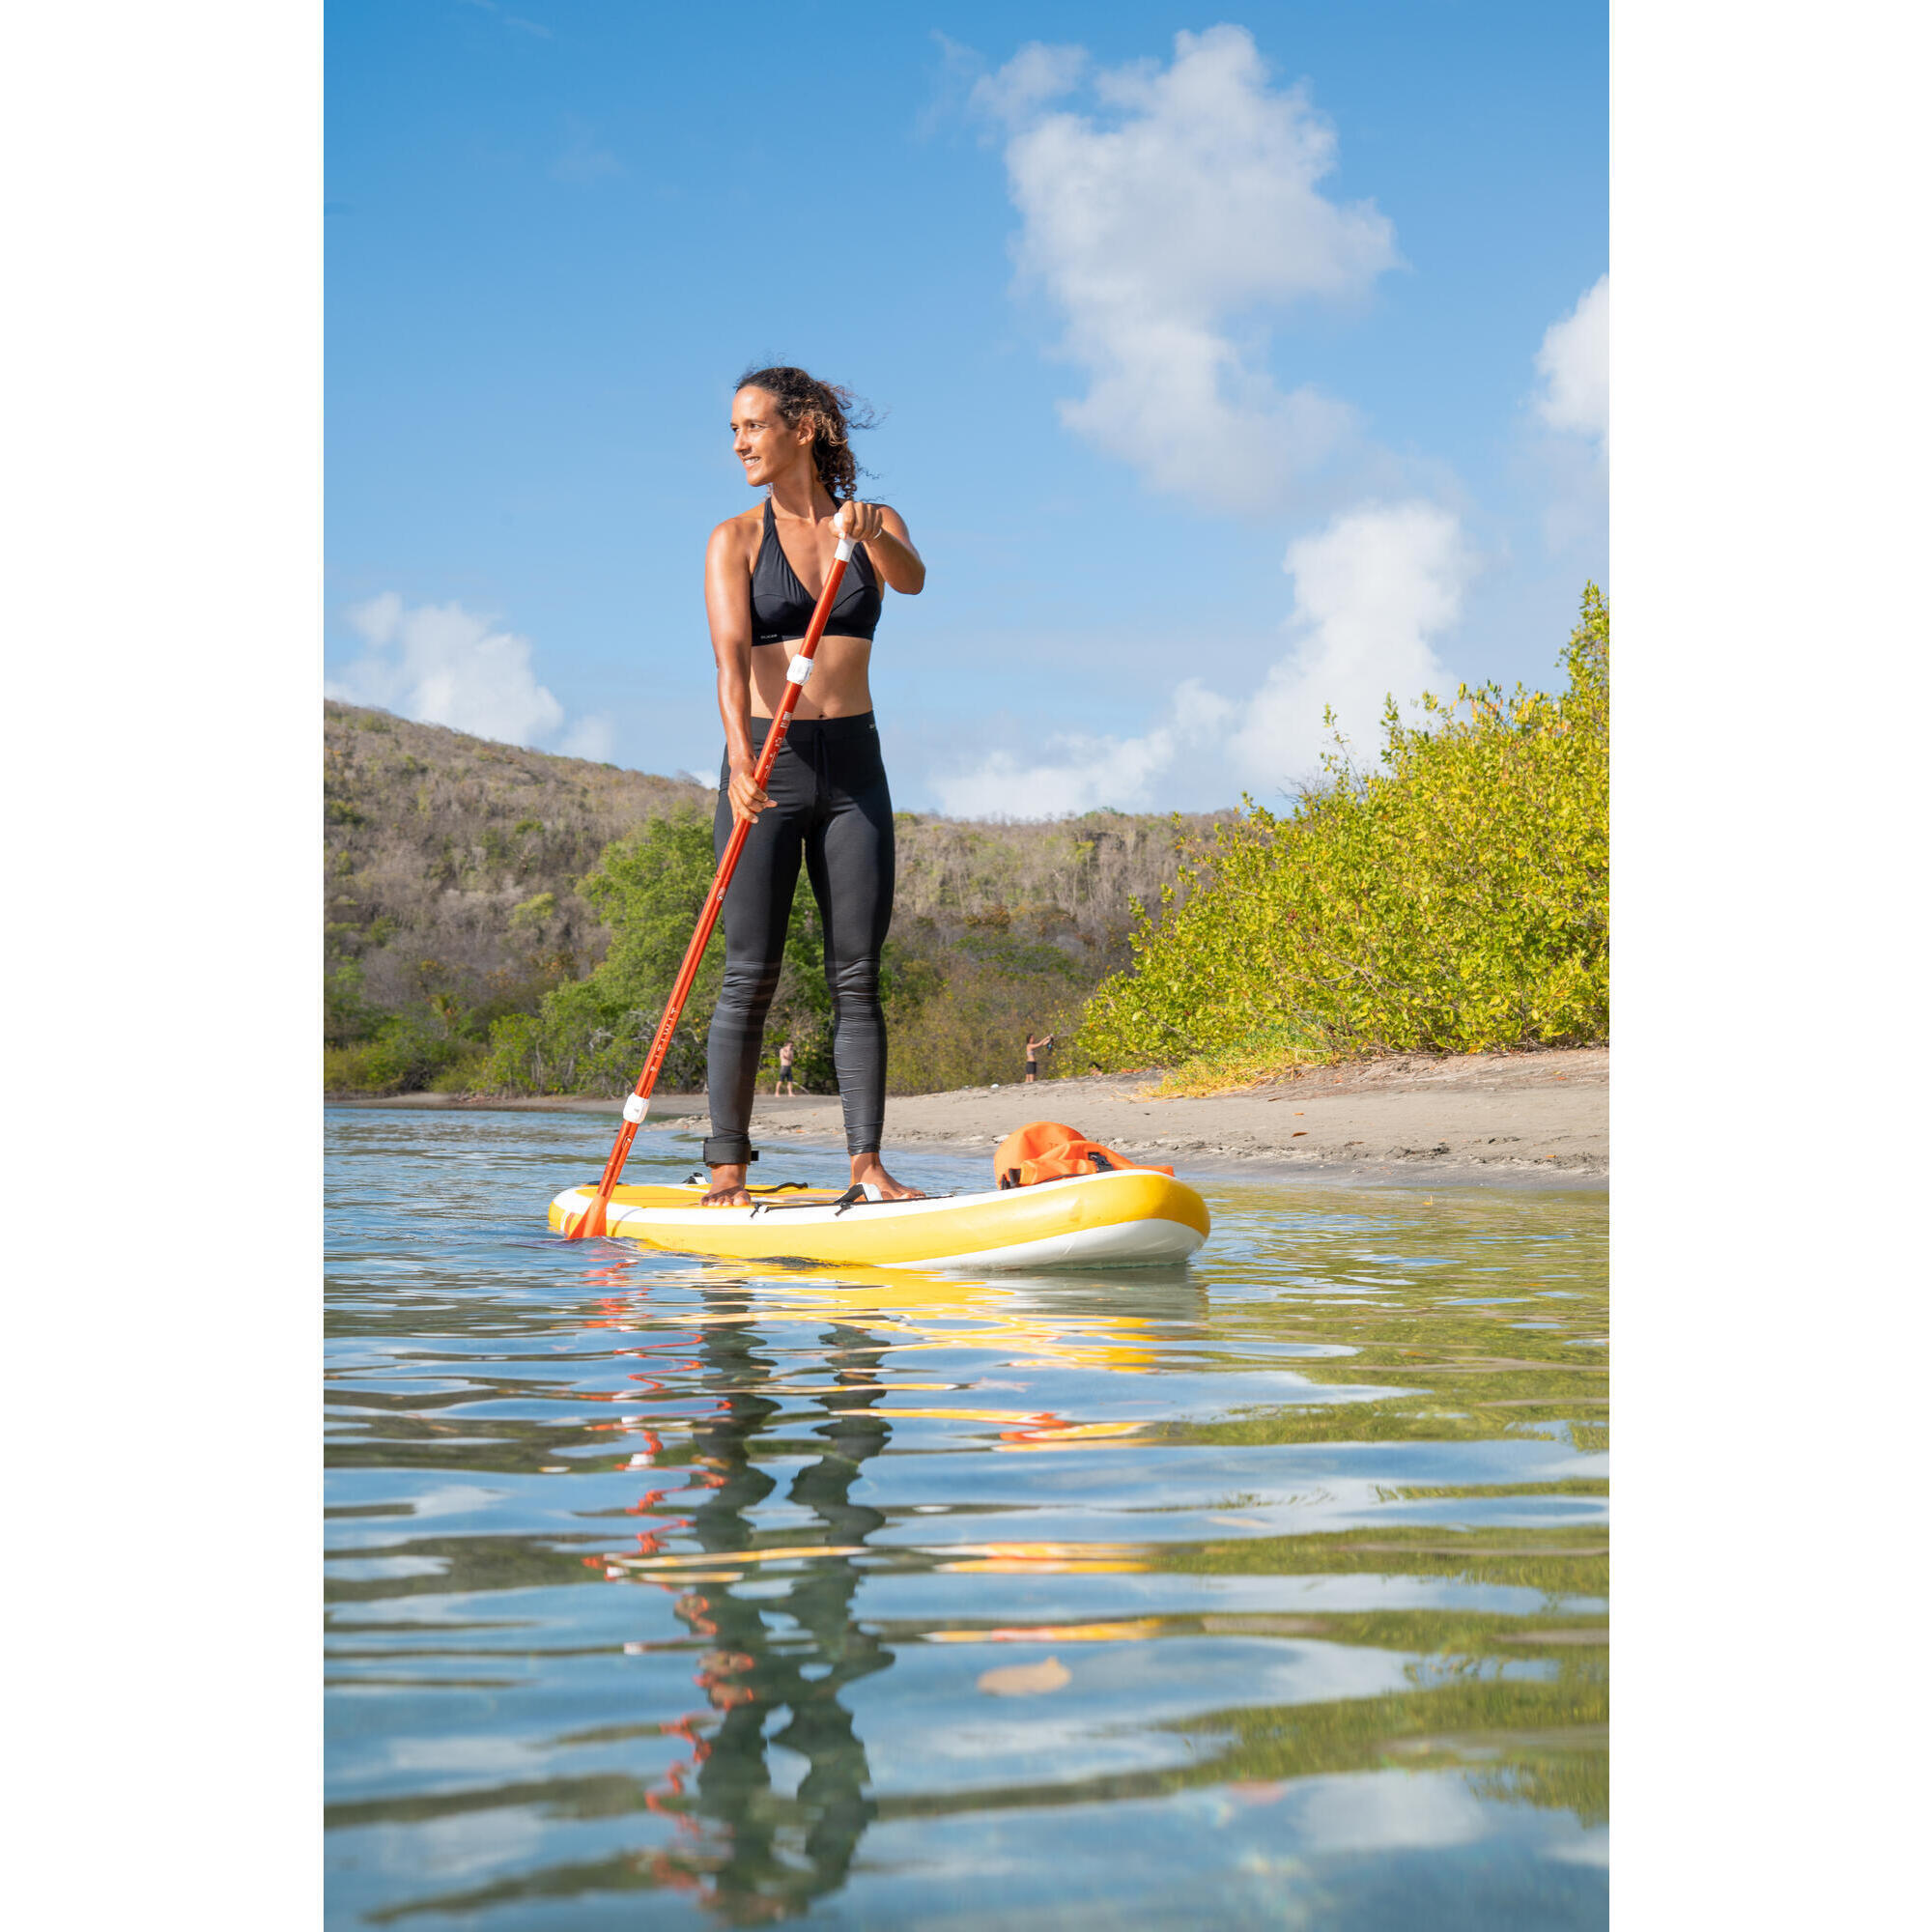 100 COMPACT 8FT (S) INFLATABLE STAND-UP PADDLEBOARD - YELLOW/WHITE (up to 60kg) 2/31